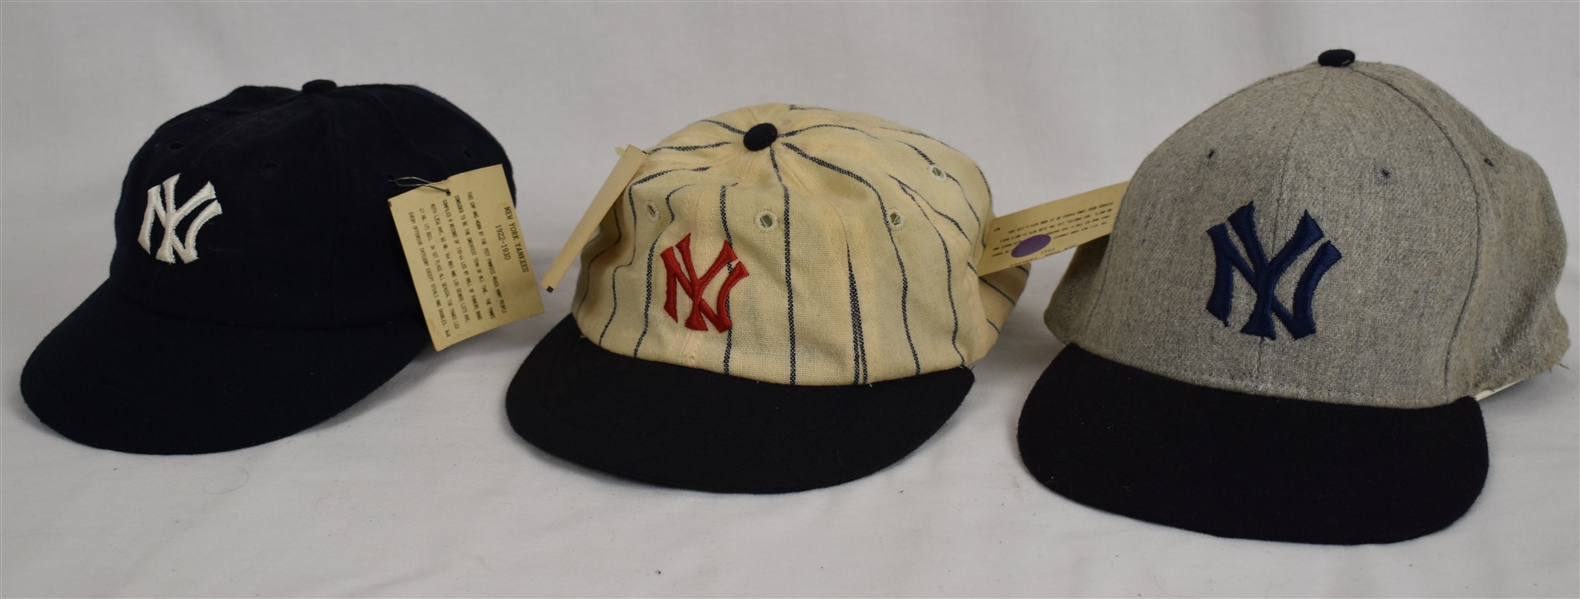 New York Yankee Collection of 3 Vintage Style Hats w/Tags